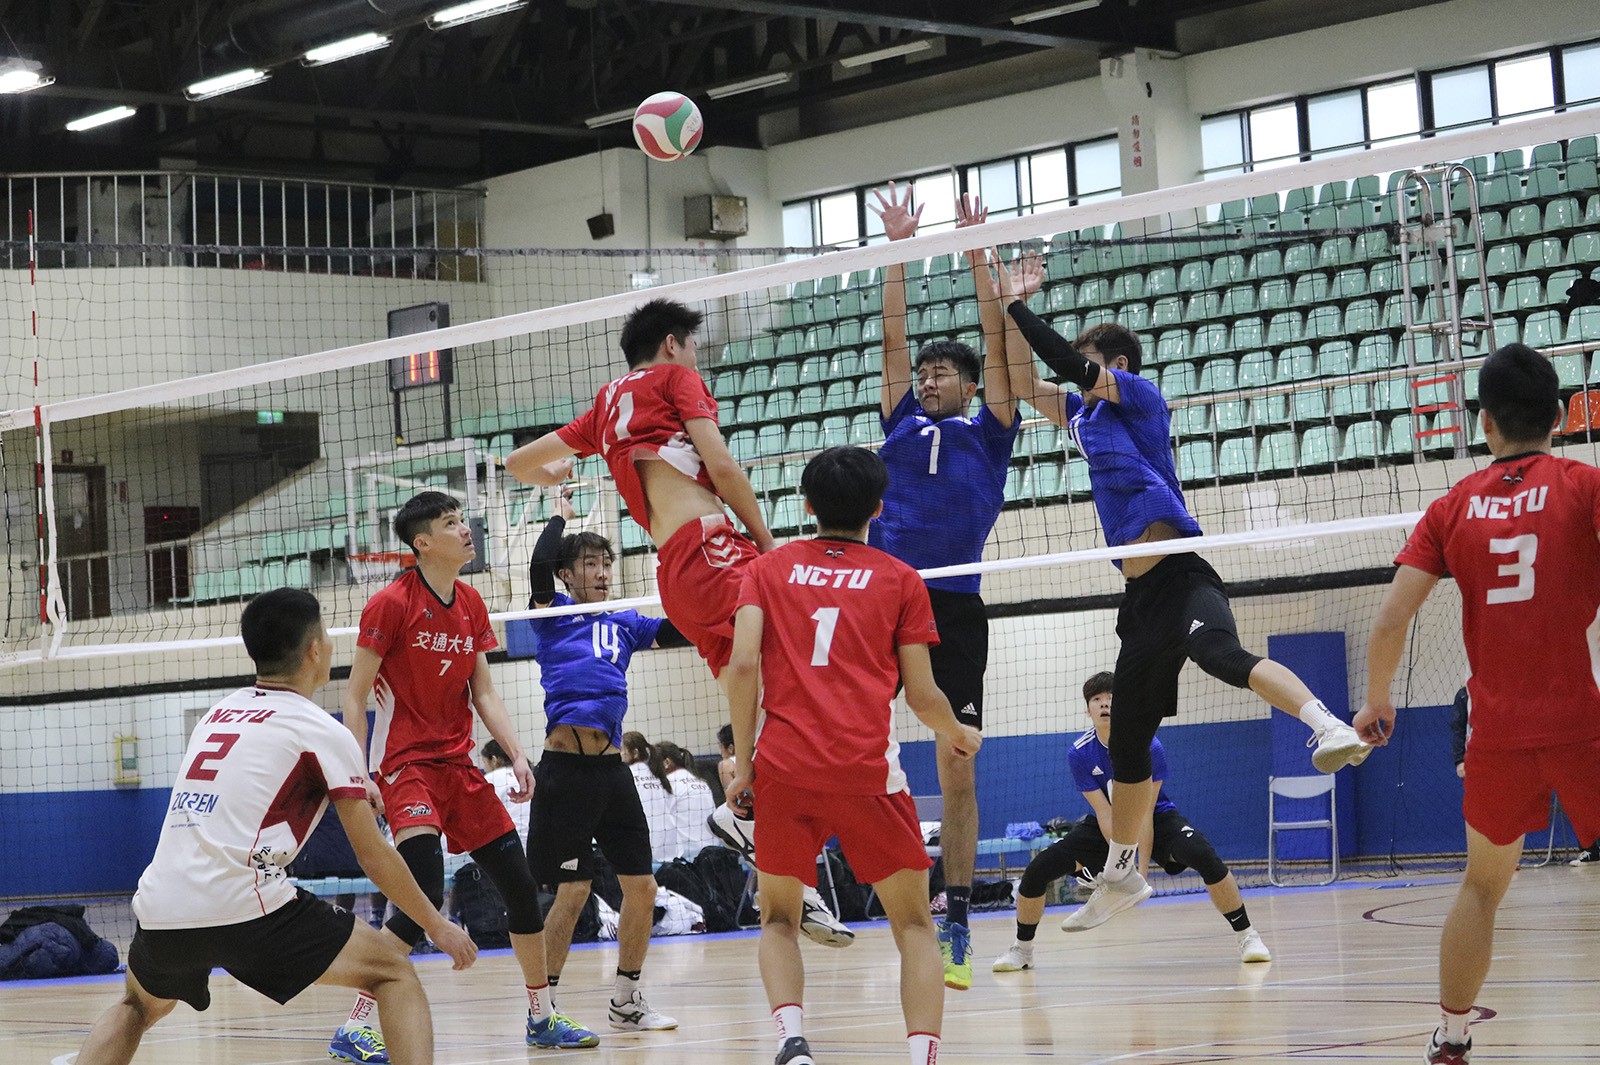 Men’s teams from CityU (blue tops) and NCTU (red tops) compete in volleyball. (Photo credit: NCTU)